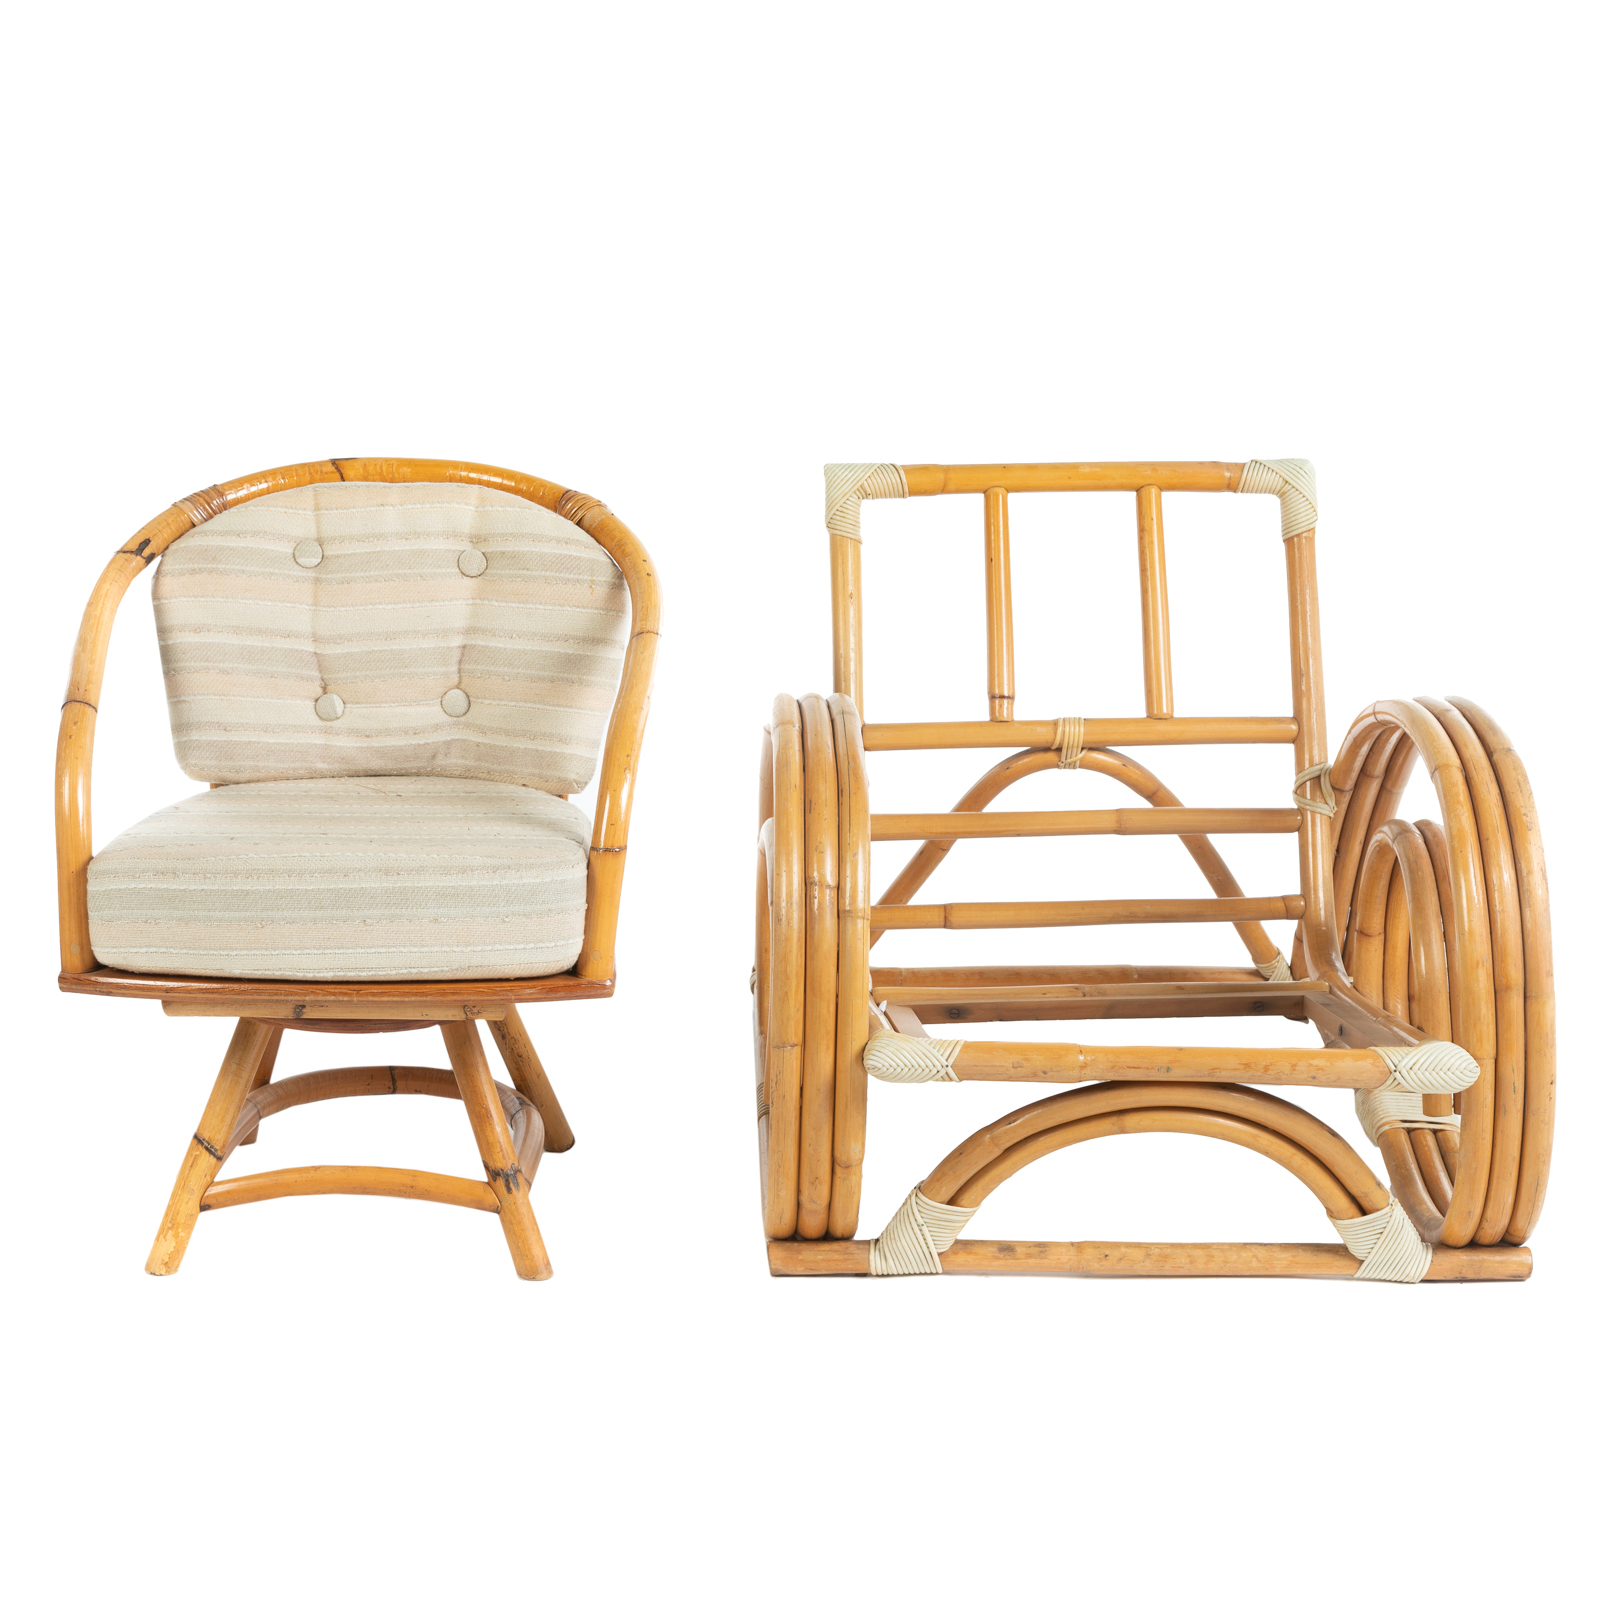 TWO PAUL FRANKL STYLE RATTAN CHAIRS 36ac6f